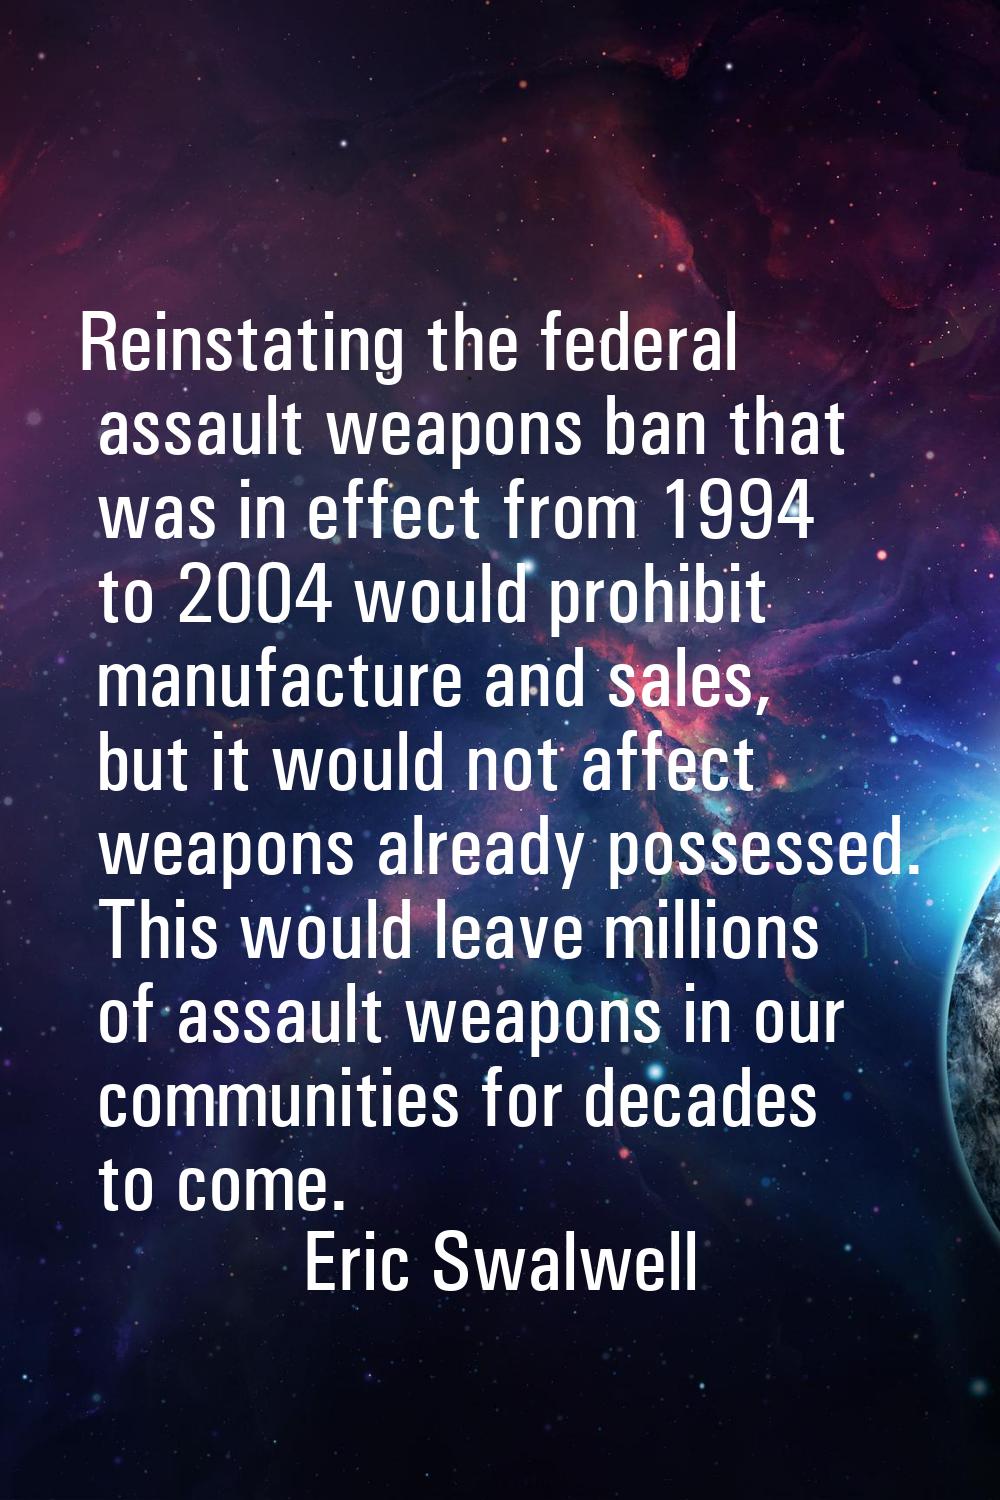 Reinstating the federal assault weapons ban that was in effect from 1994 to 2004 would prohibit man